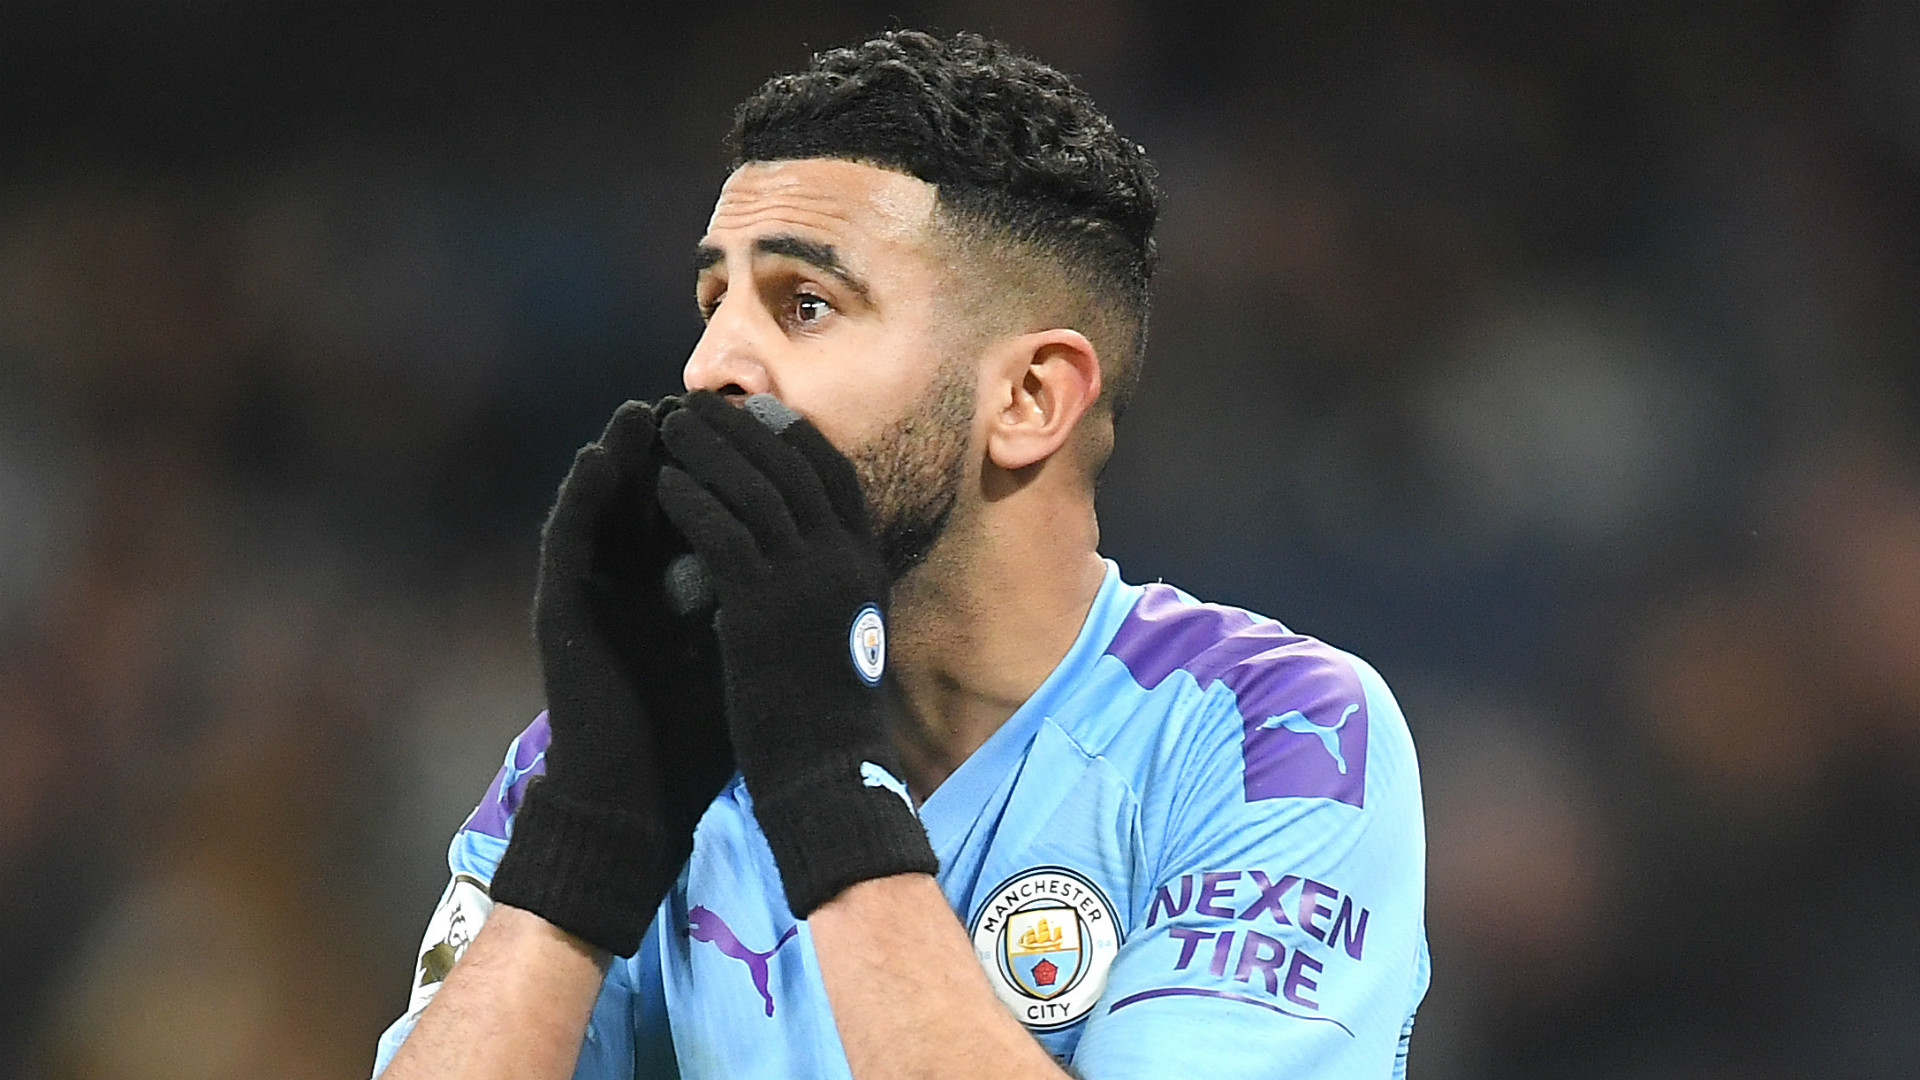 'Liverpool were interested in me, but it finished when they took Salah' - Mahrez says he was on Reds' radar before Man City move